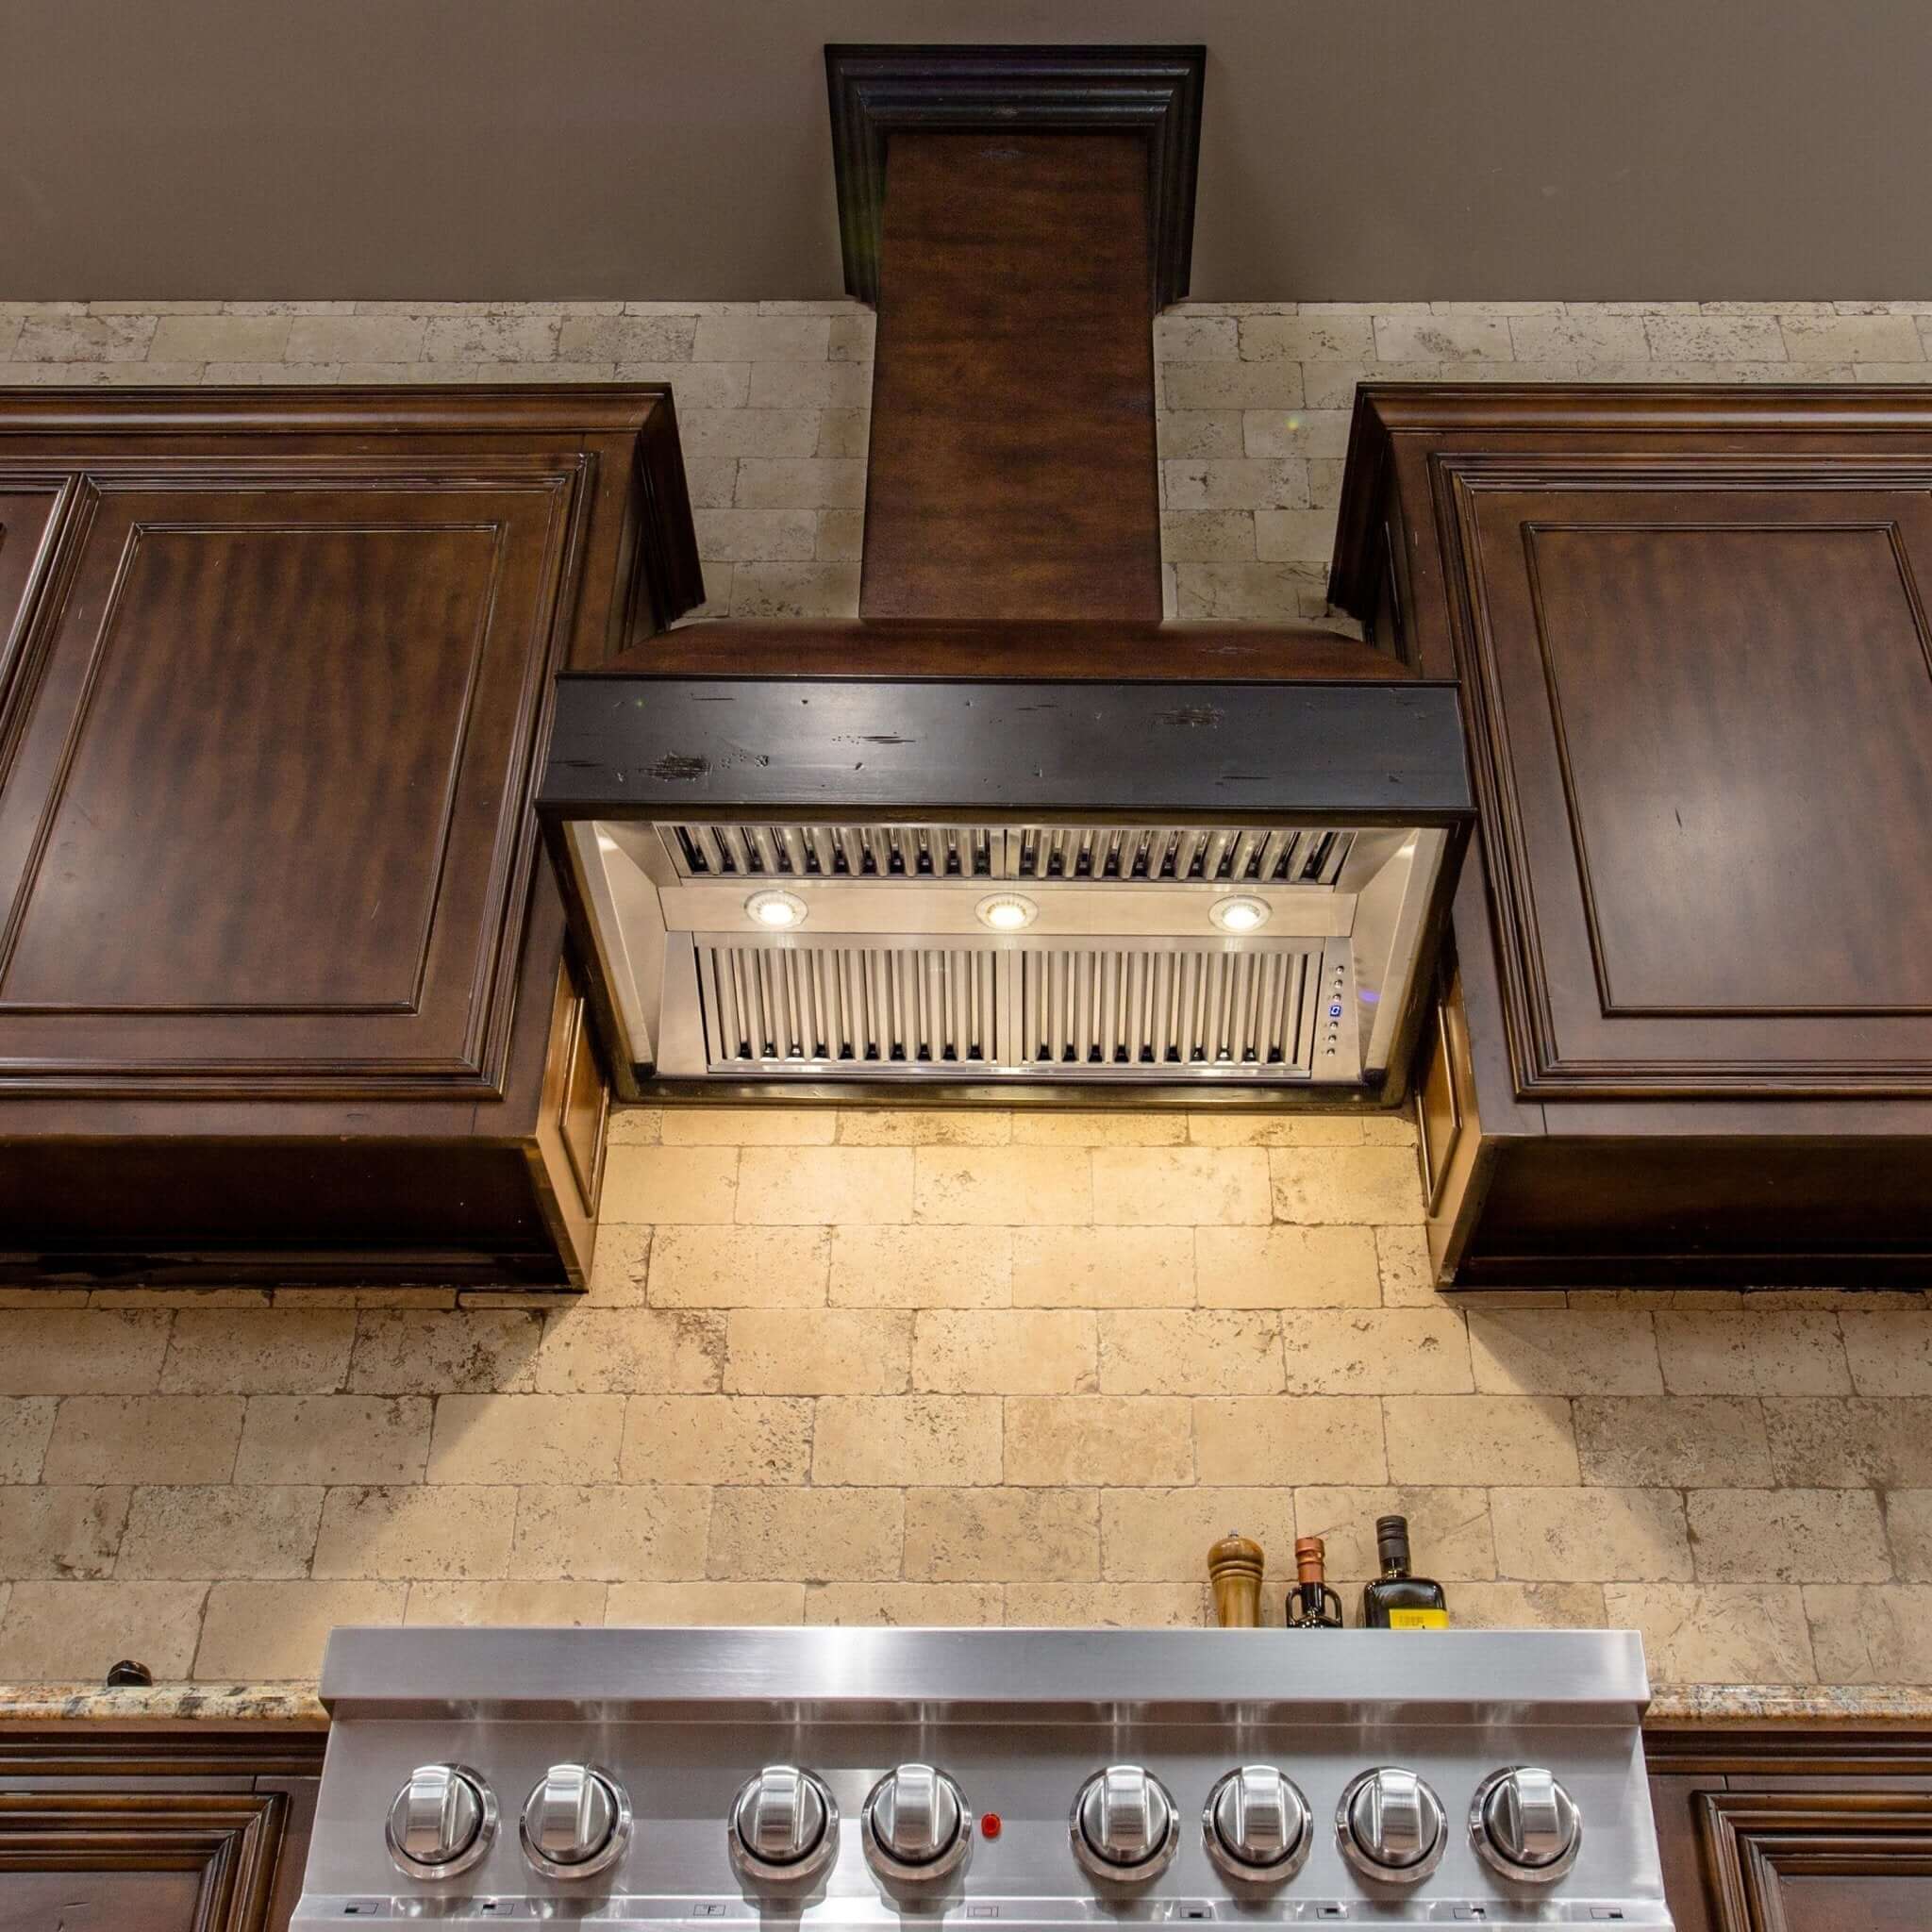 ZLINE 36 in. Wooden Wall Mount Range Hood in Antigua and Walnut (369AW-36) in a rustic kitchen with LED lighting activated and illuminating wall and cooktop.